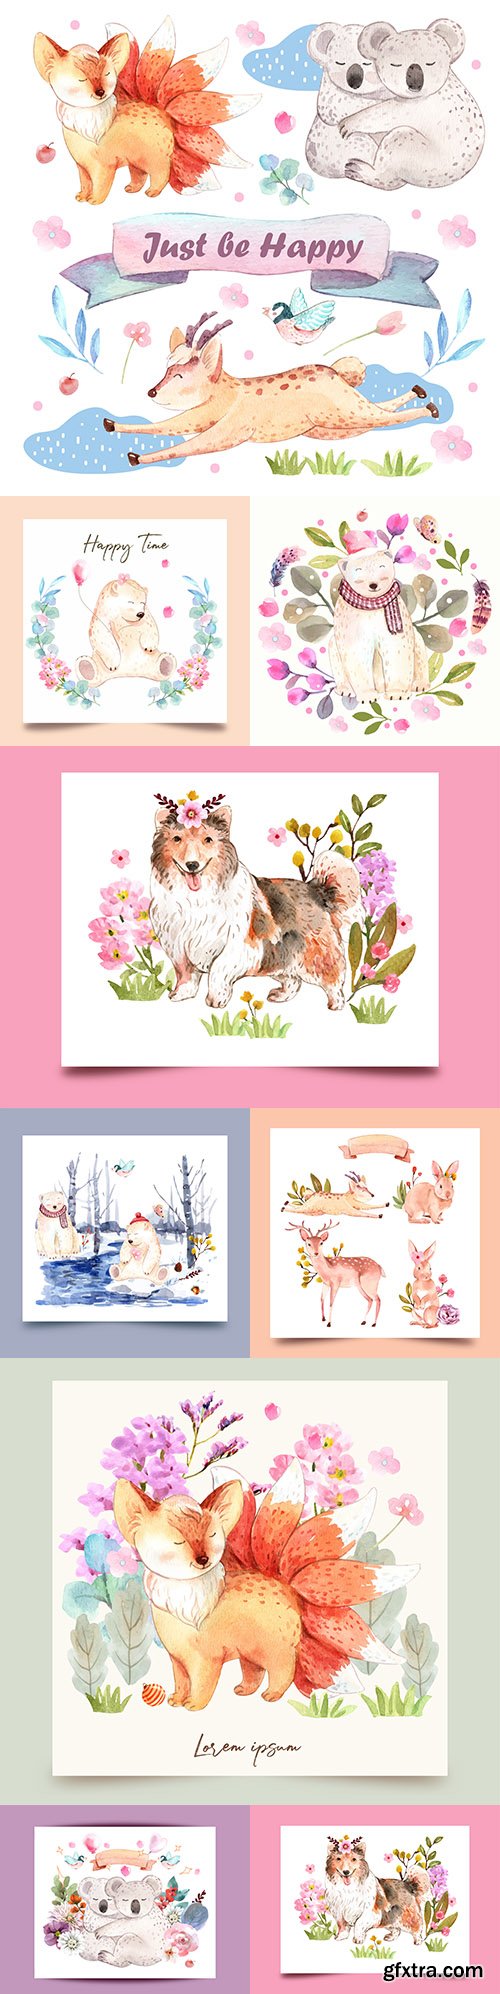 Watercolor funny animals with flowers vector design